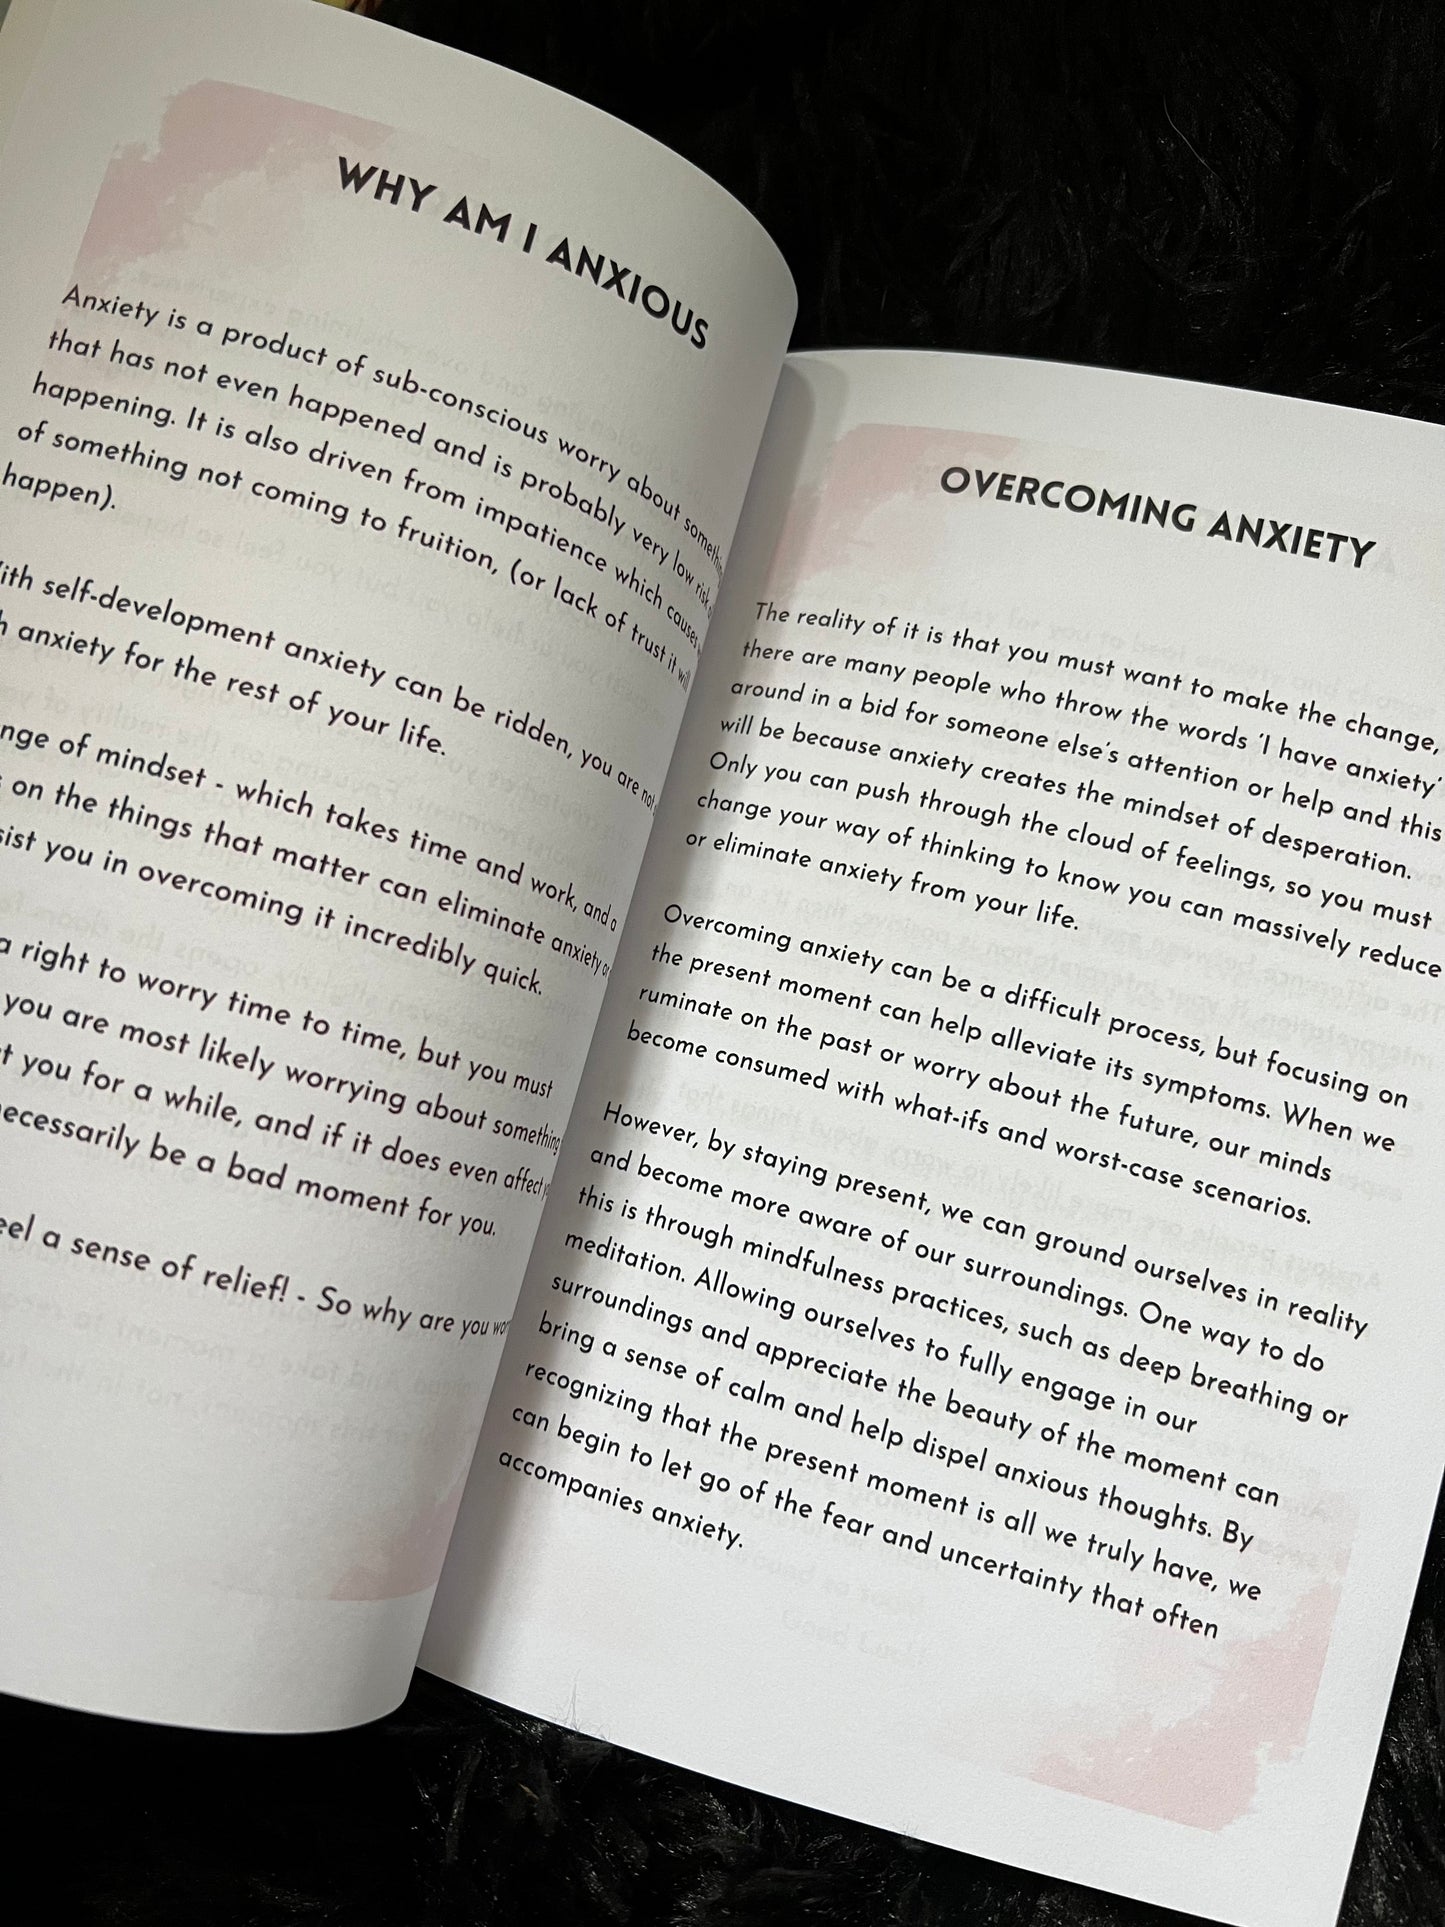 ‘Facing Anxiety’ - An anxiety journal